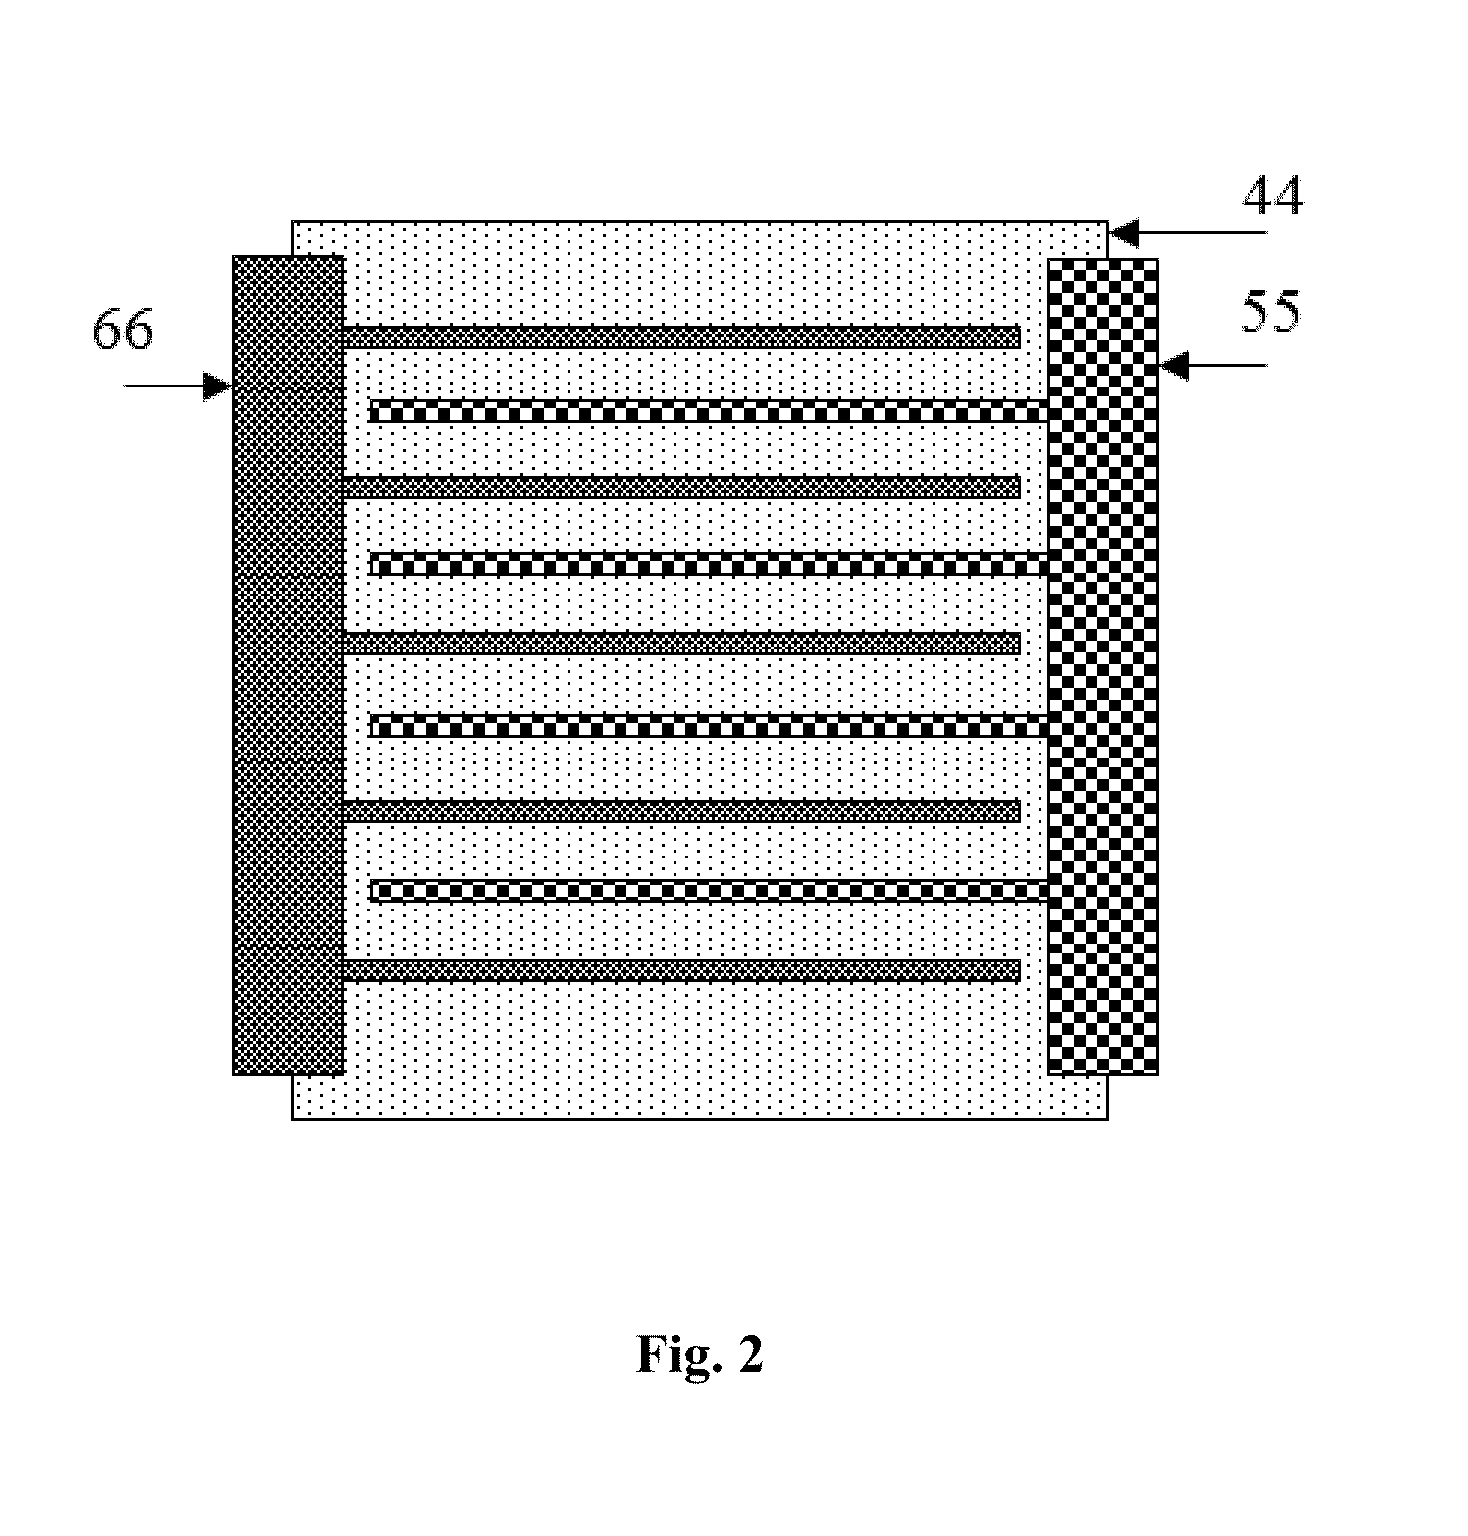 Graphene transistor optical detector based on metamaterial structure and application thereof